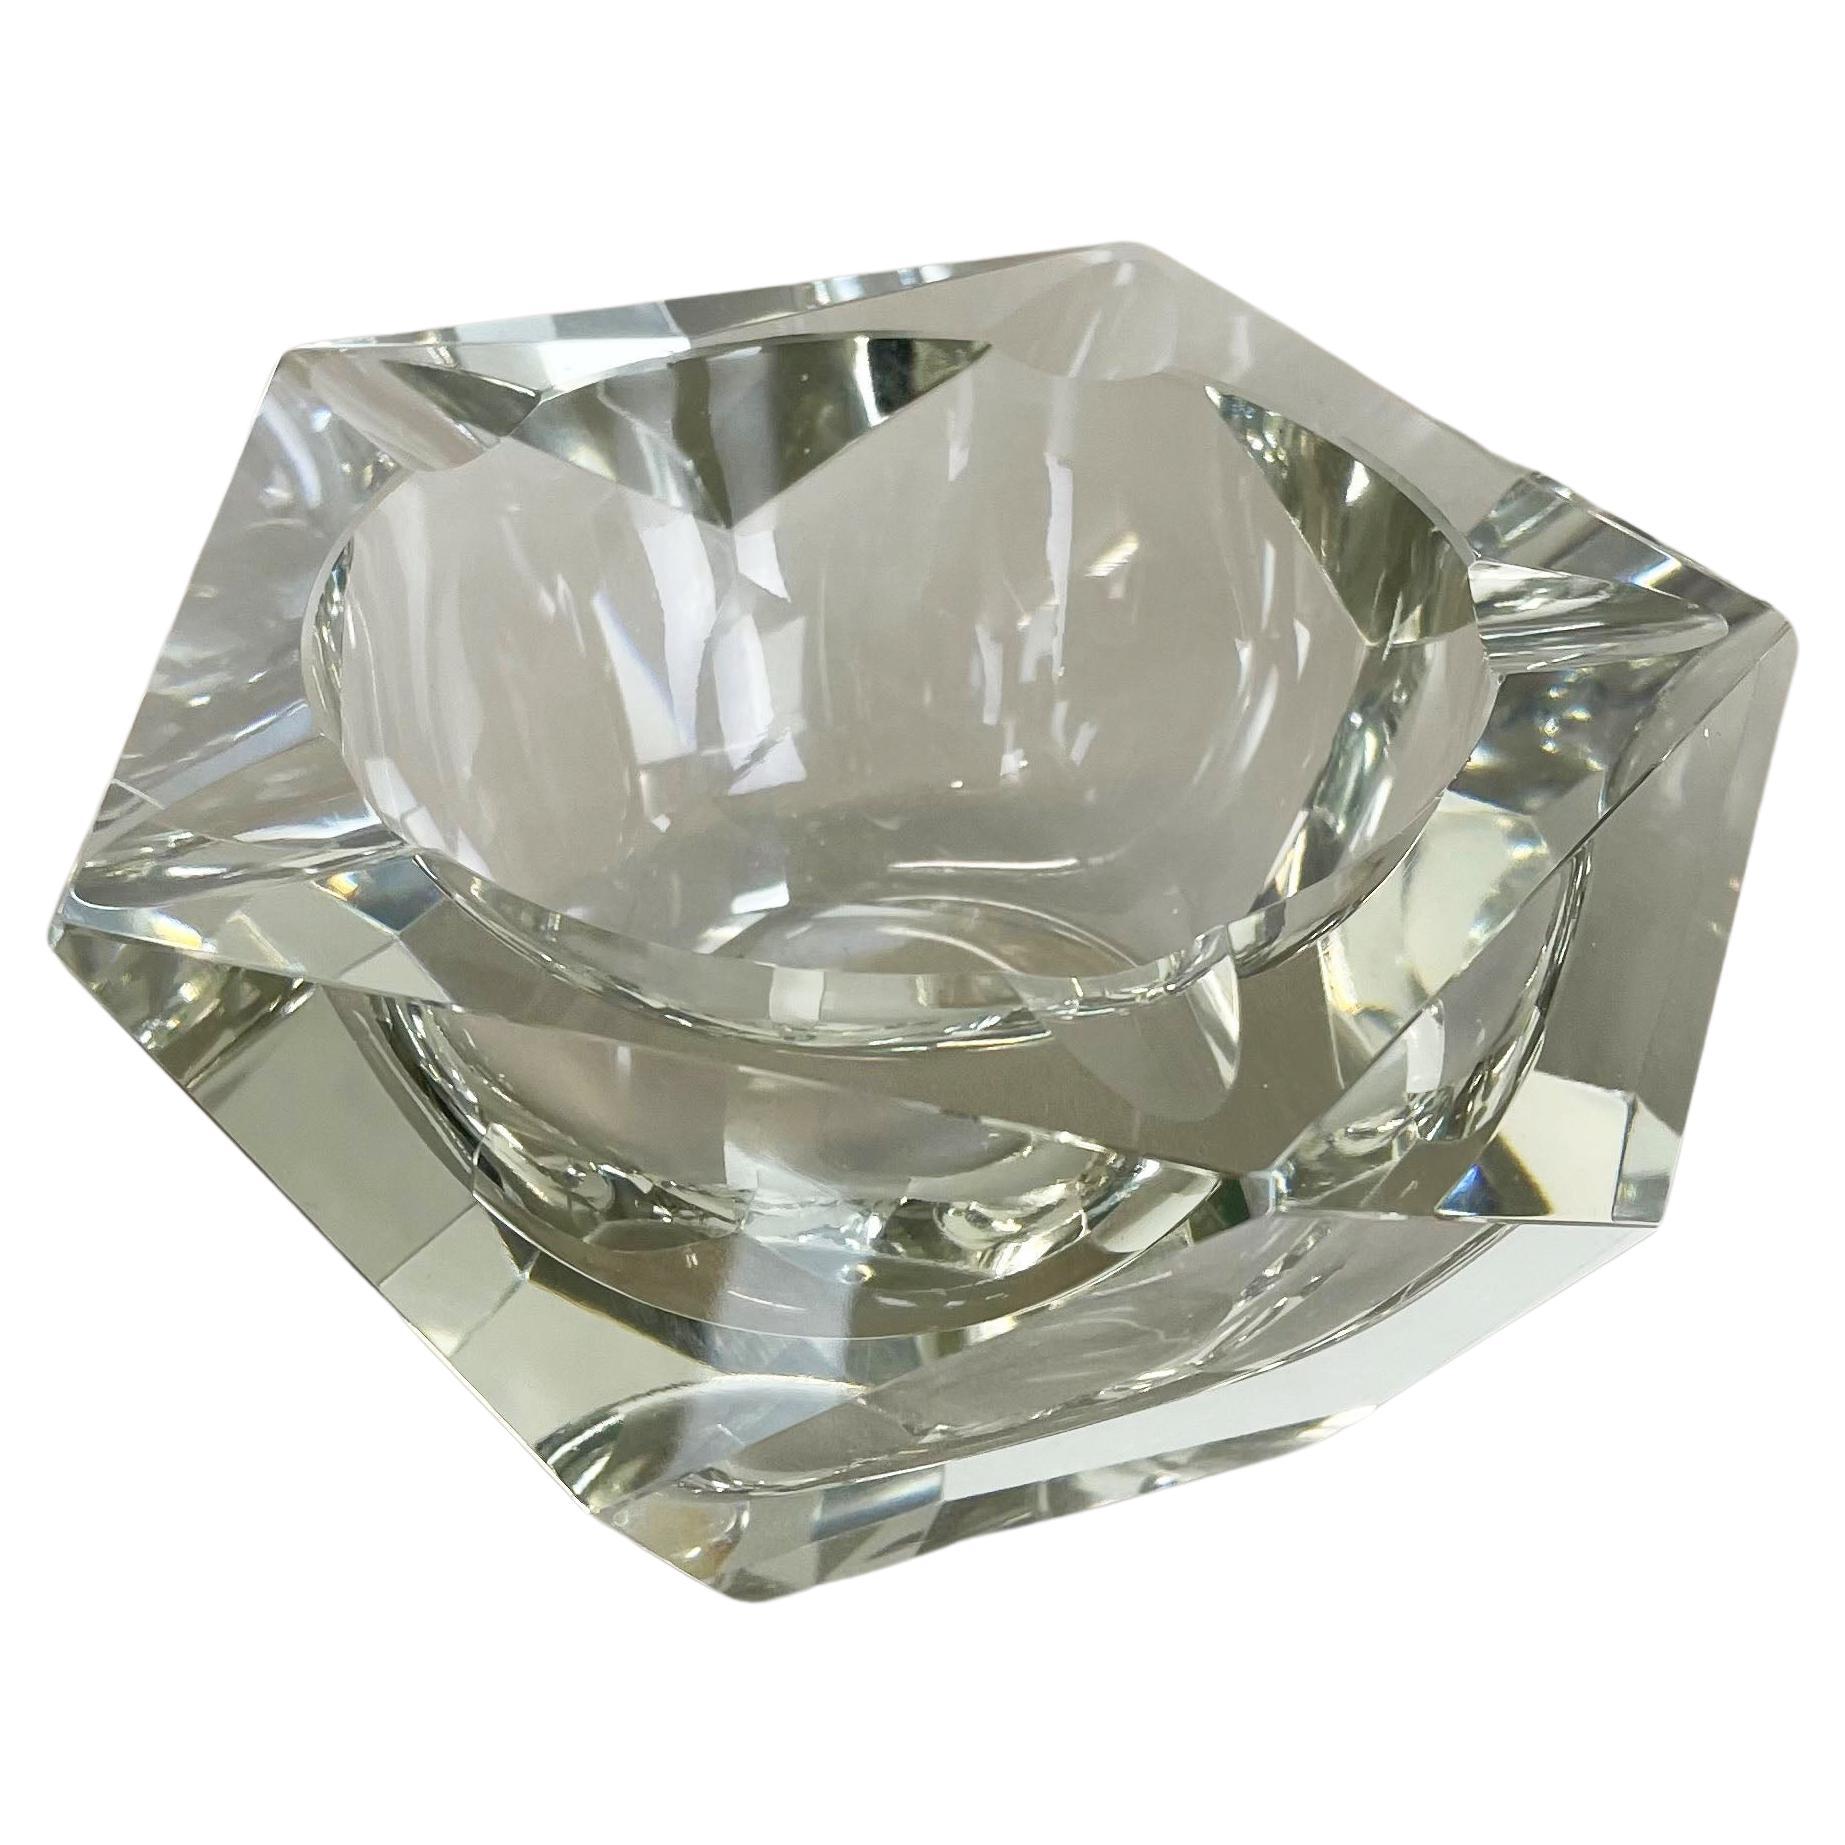 Large Murano Faceted Diamond Lucid Bowl Ashtray Element, Italy, 1970s For Sale